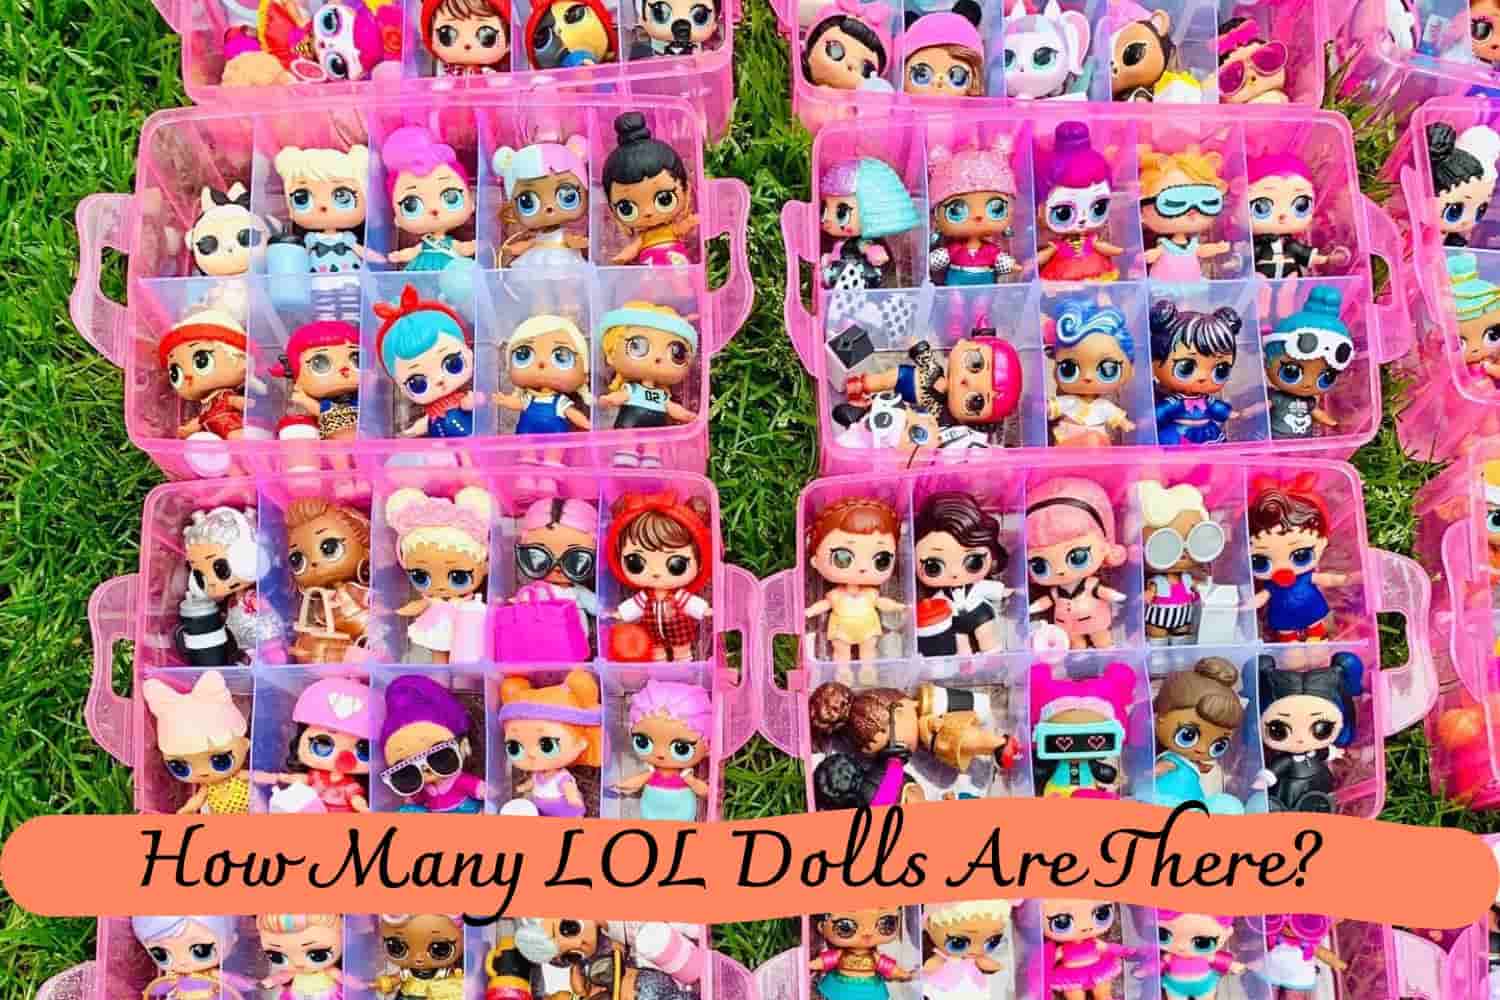 How Many LOL Dolls Are There?